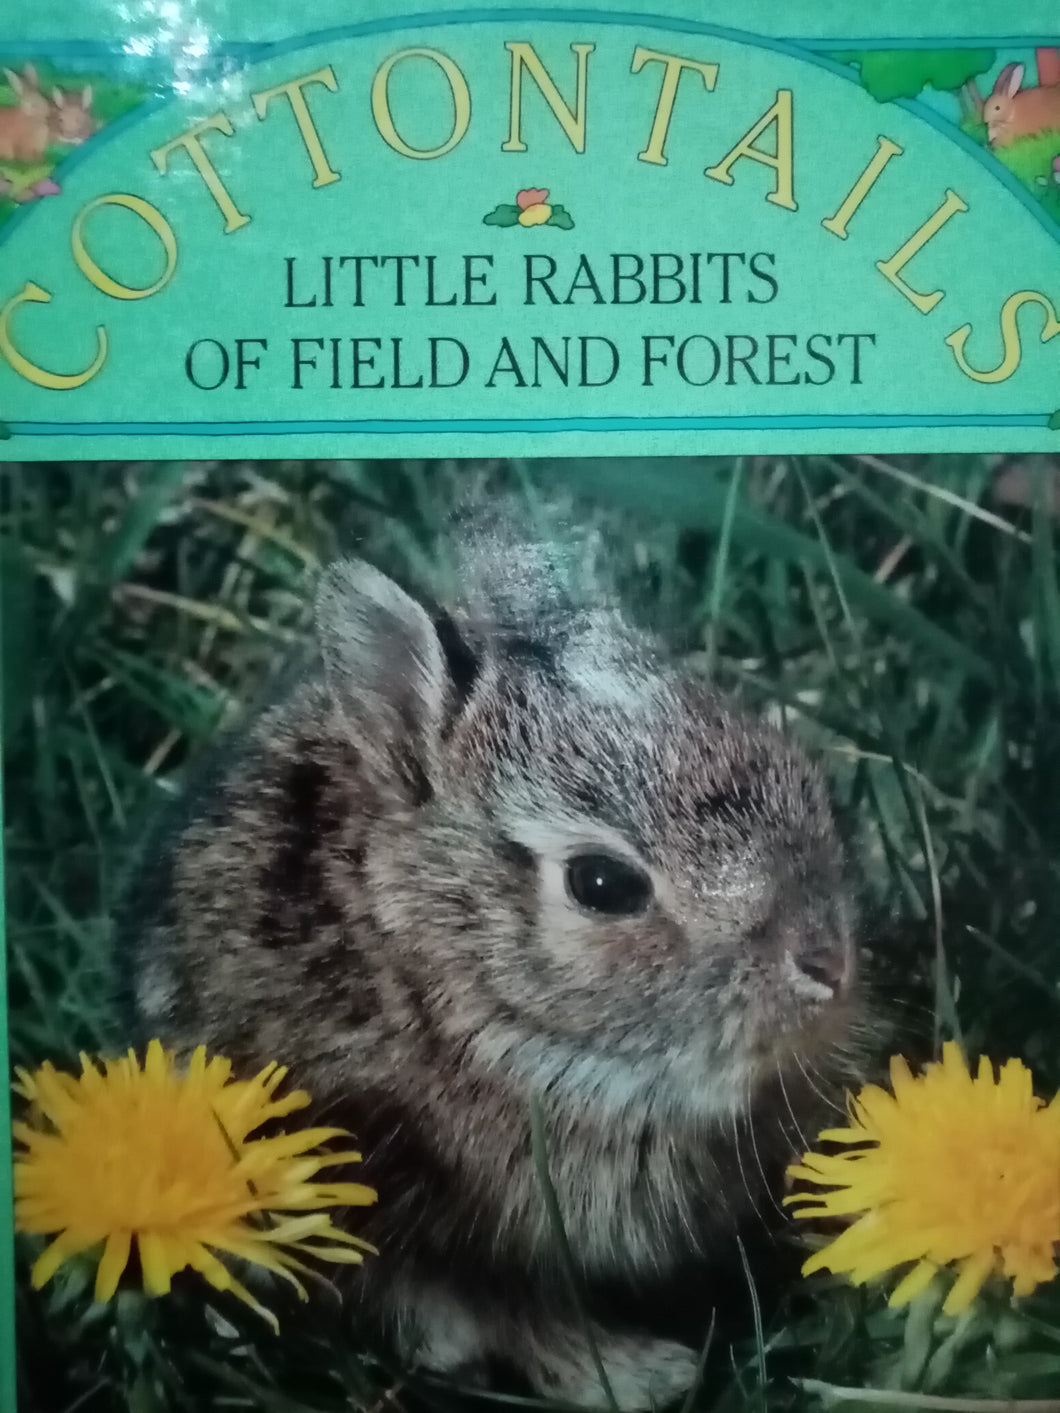 Cottontails: Little Rabbits Of Feild And Forest